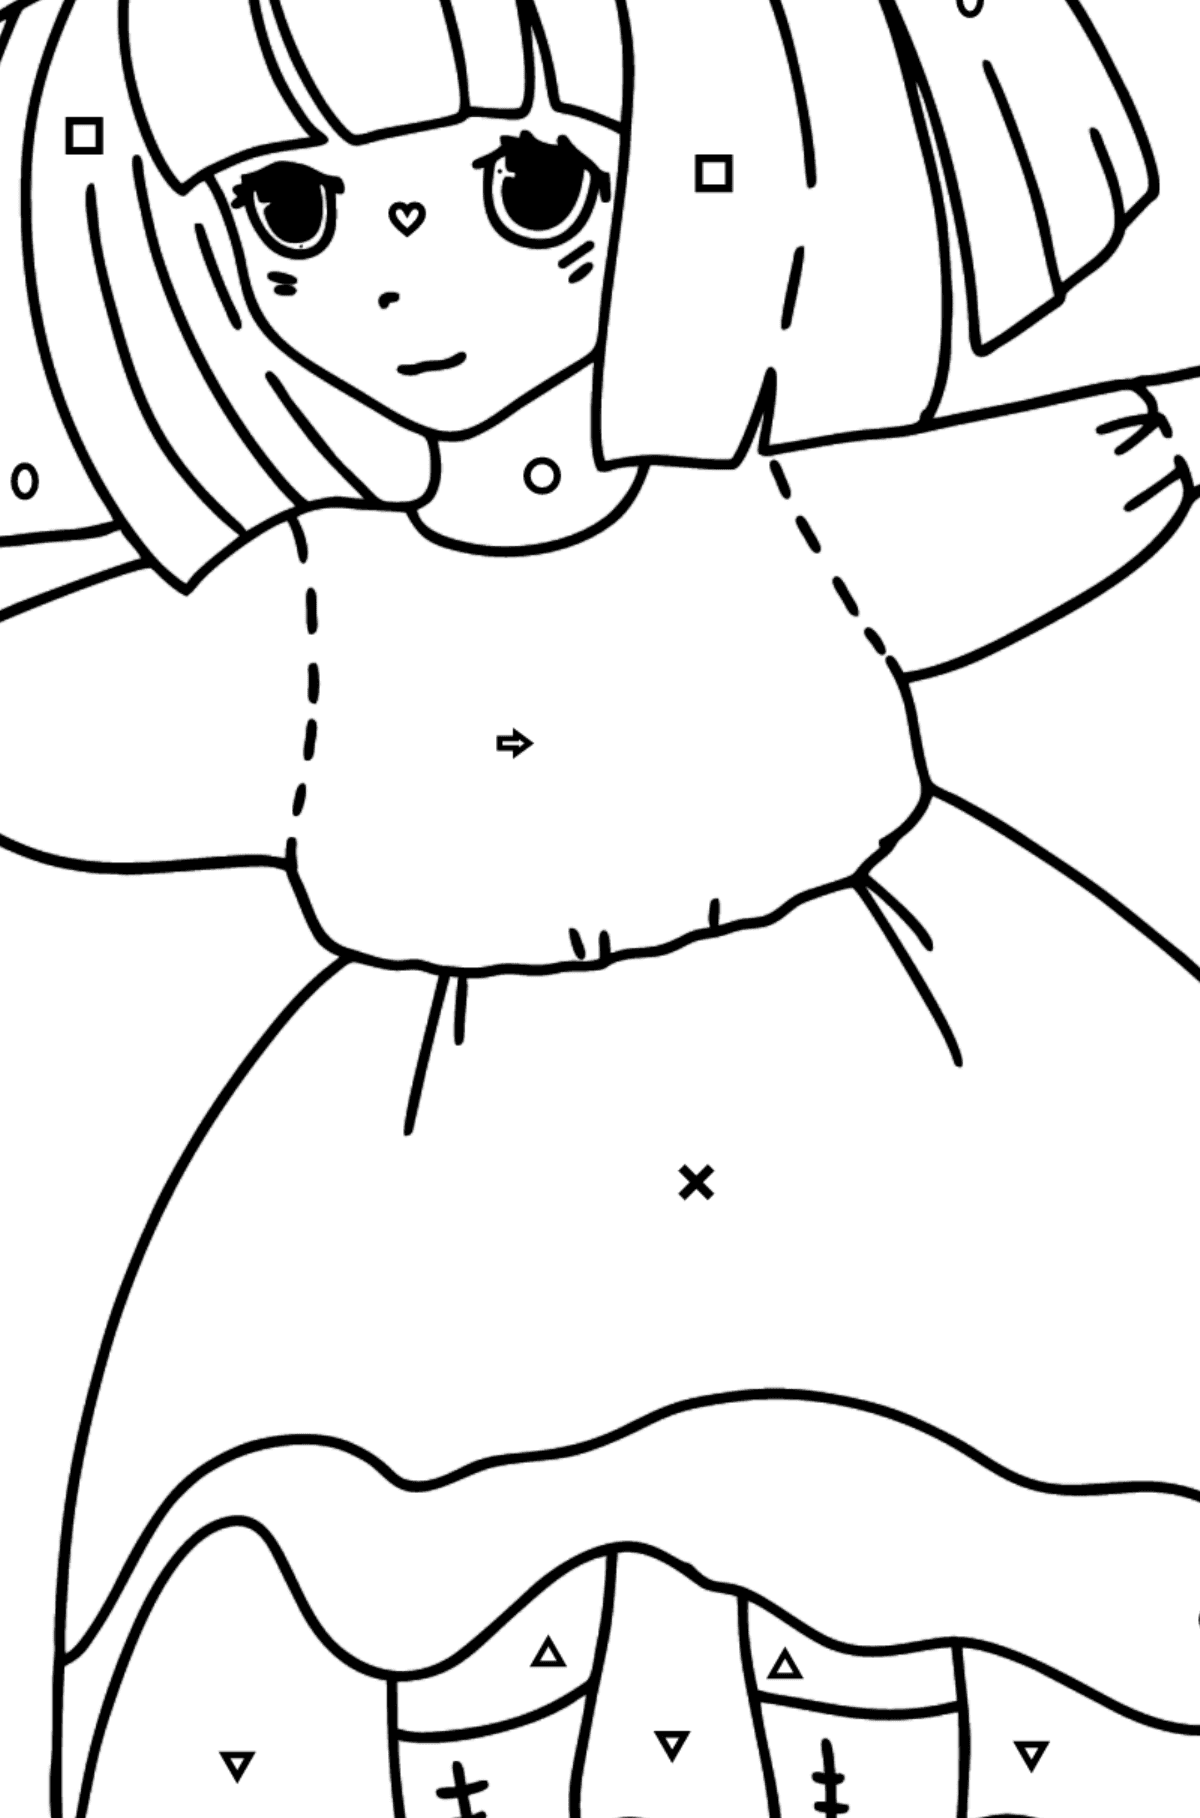 Anime Girl Dancing coloring page - Coloring by Symbols and Geometric Shapes for Kids